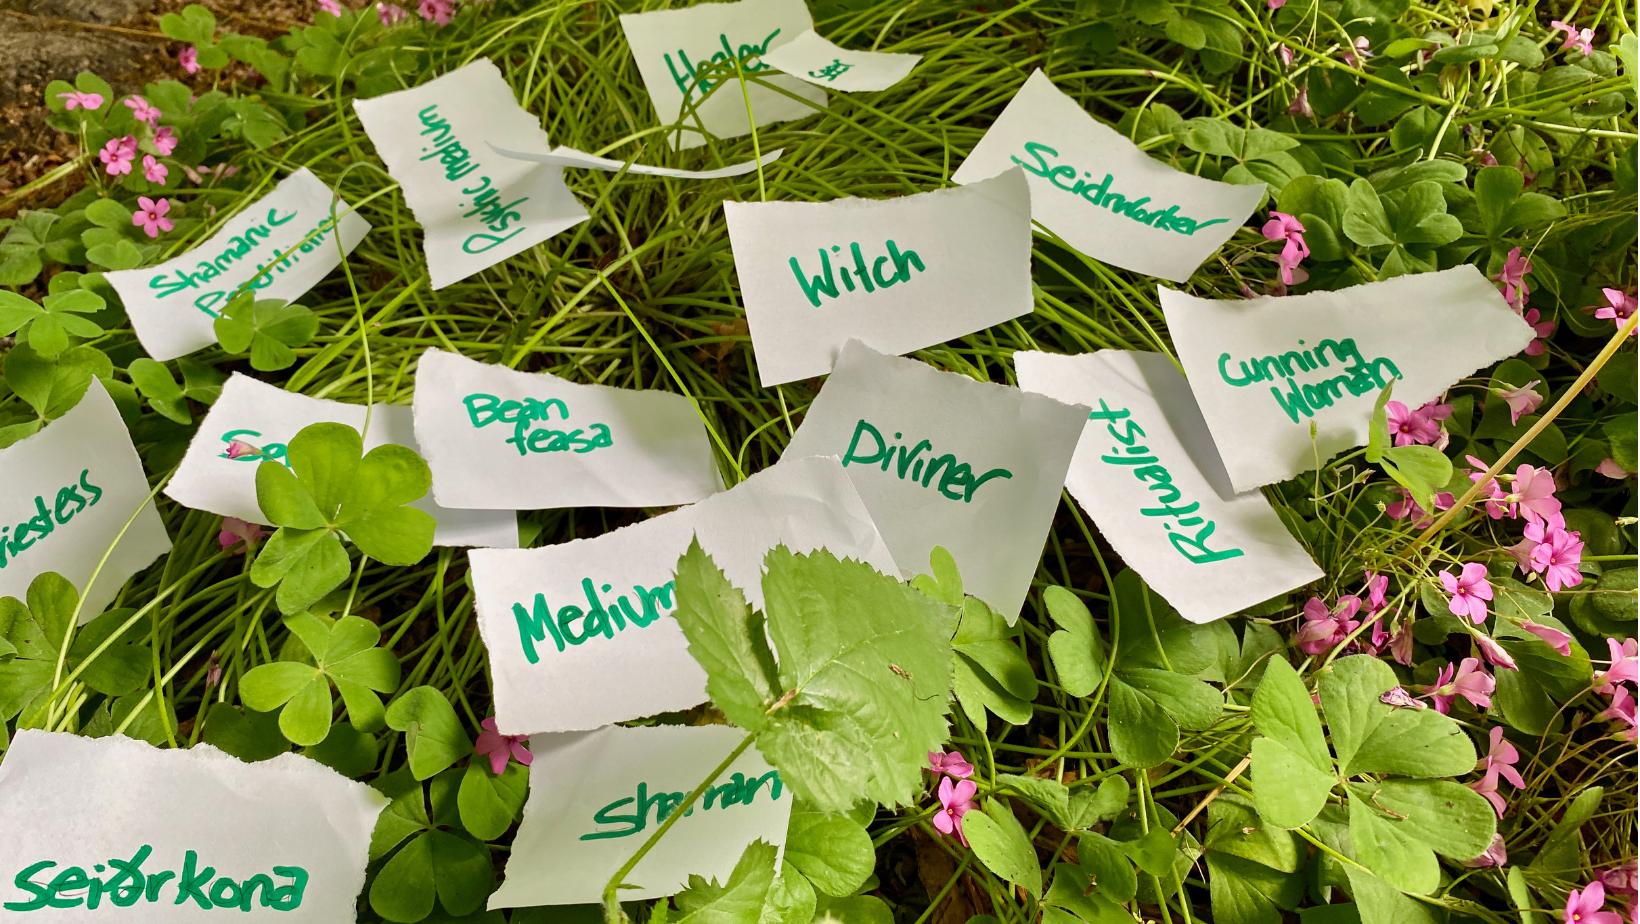 Small torn pieces of paper are scattered in a patch of pink sorrel. The papers read witch, Volva, Seidrkona, diviner, healer, bean feasa, spirit worker, shaman, etc.